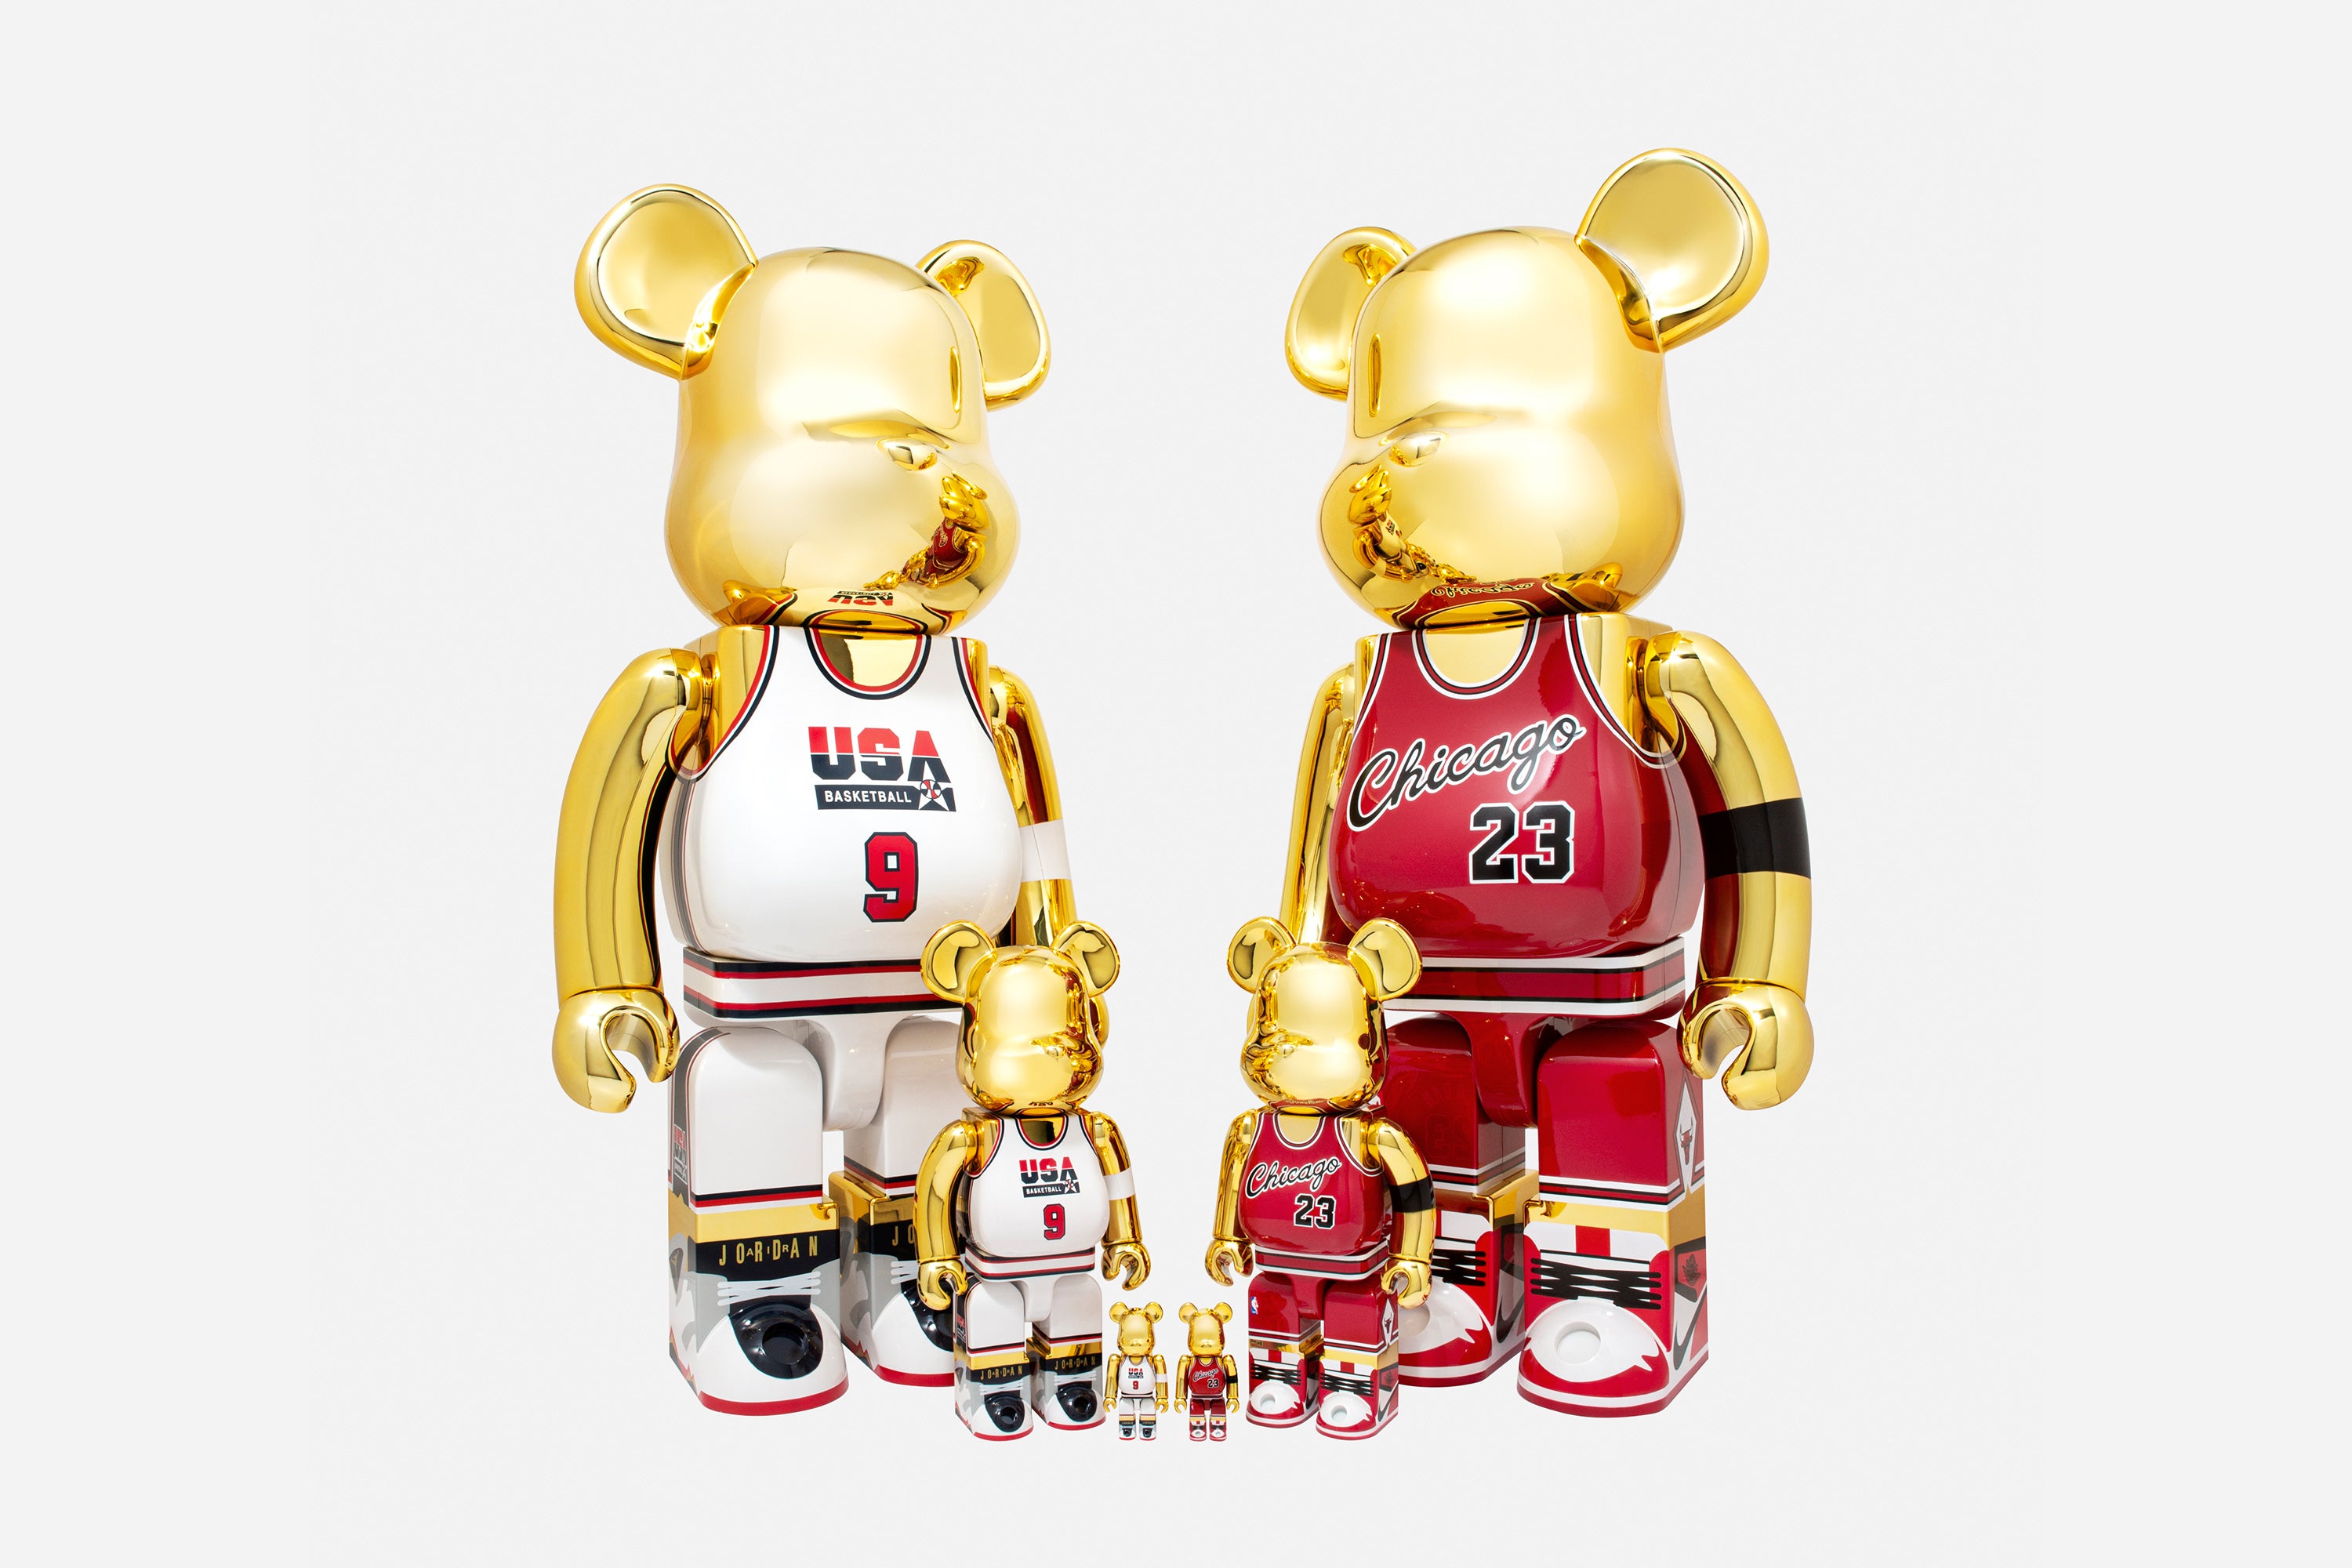 MEDICOM TOY pays homage to Michael Jordan with two BE@RBRICK